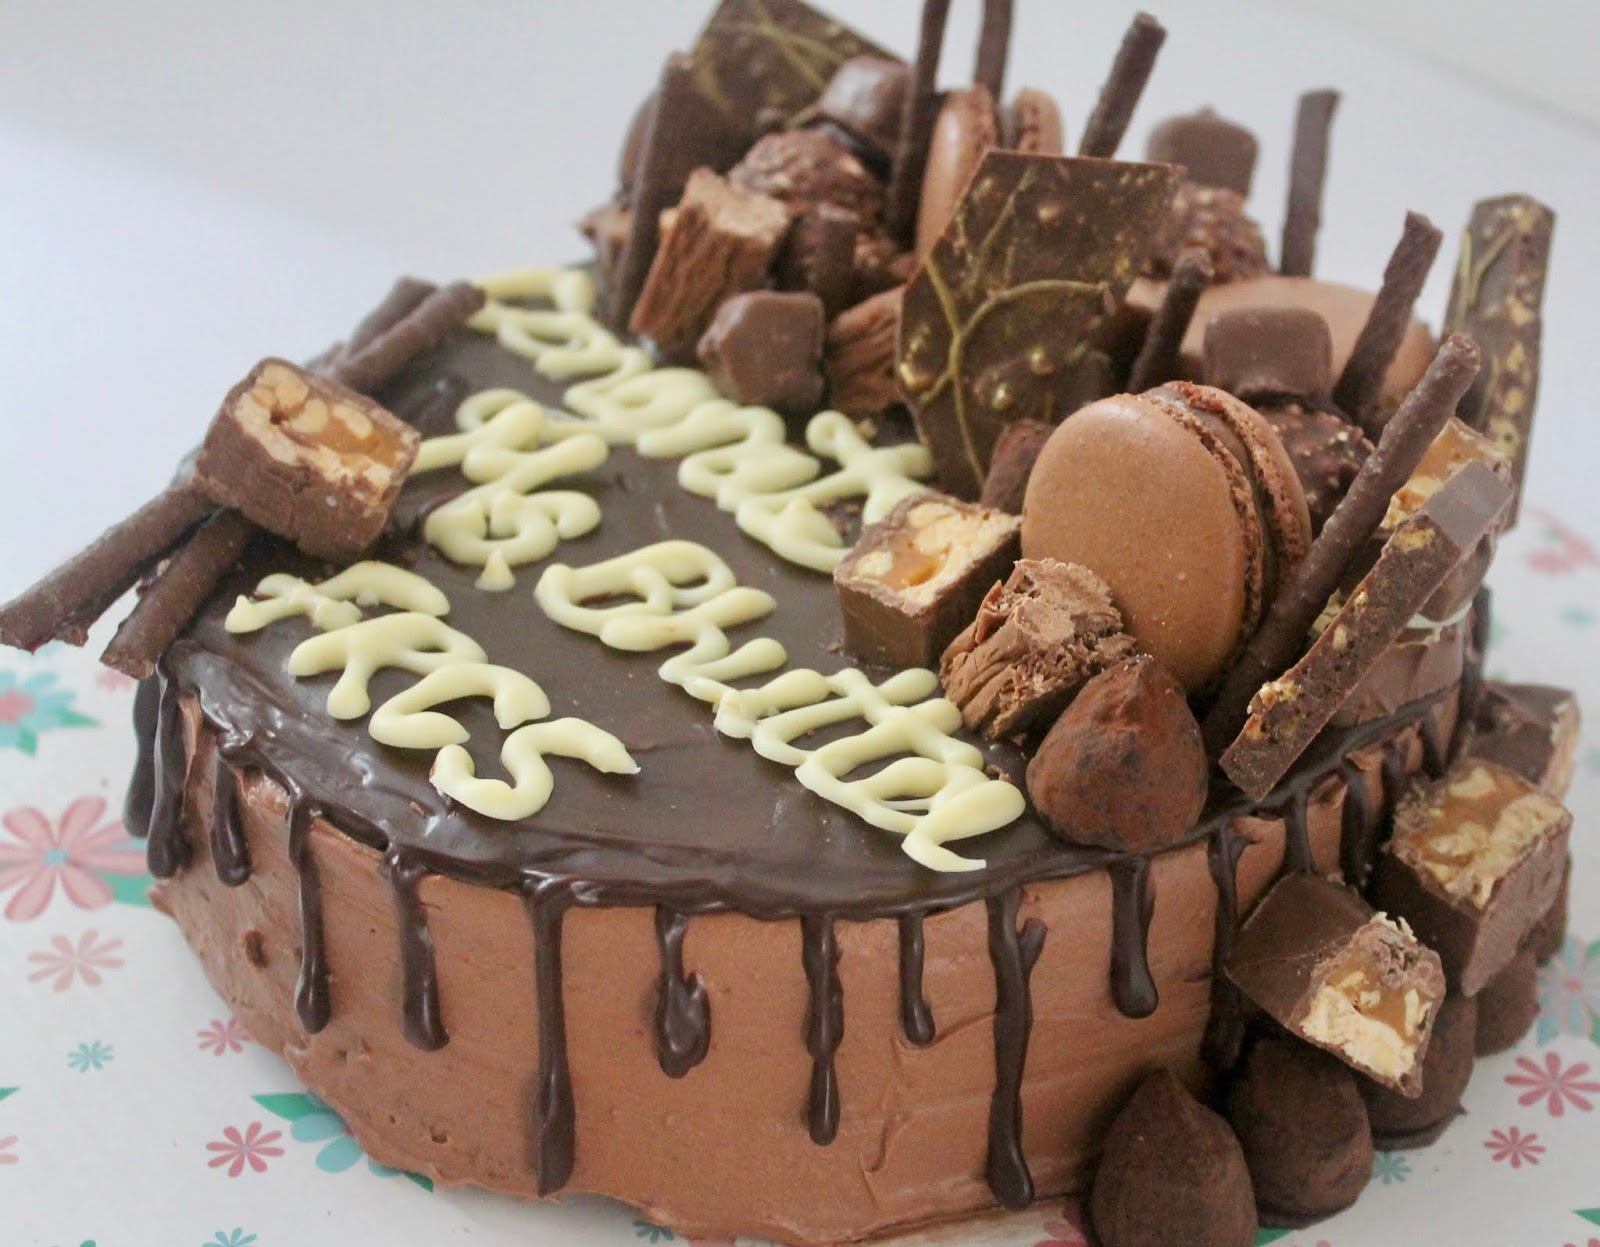 A cup of tea solves everything: Chocolate bar drip cake